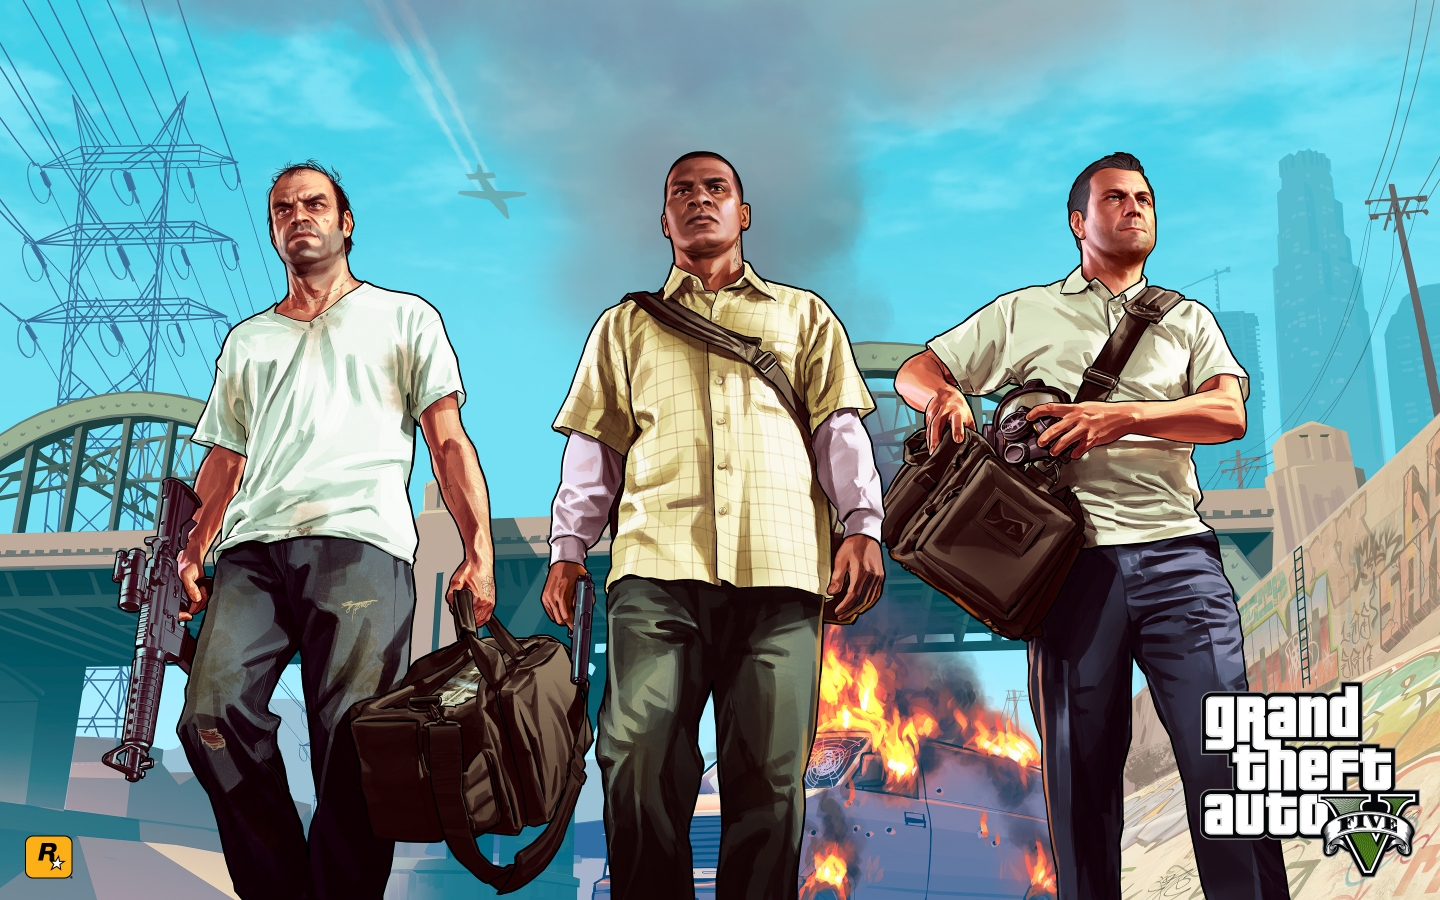 Grand Theft Auto Vice City for 1440 x 900 widescreen resolution